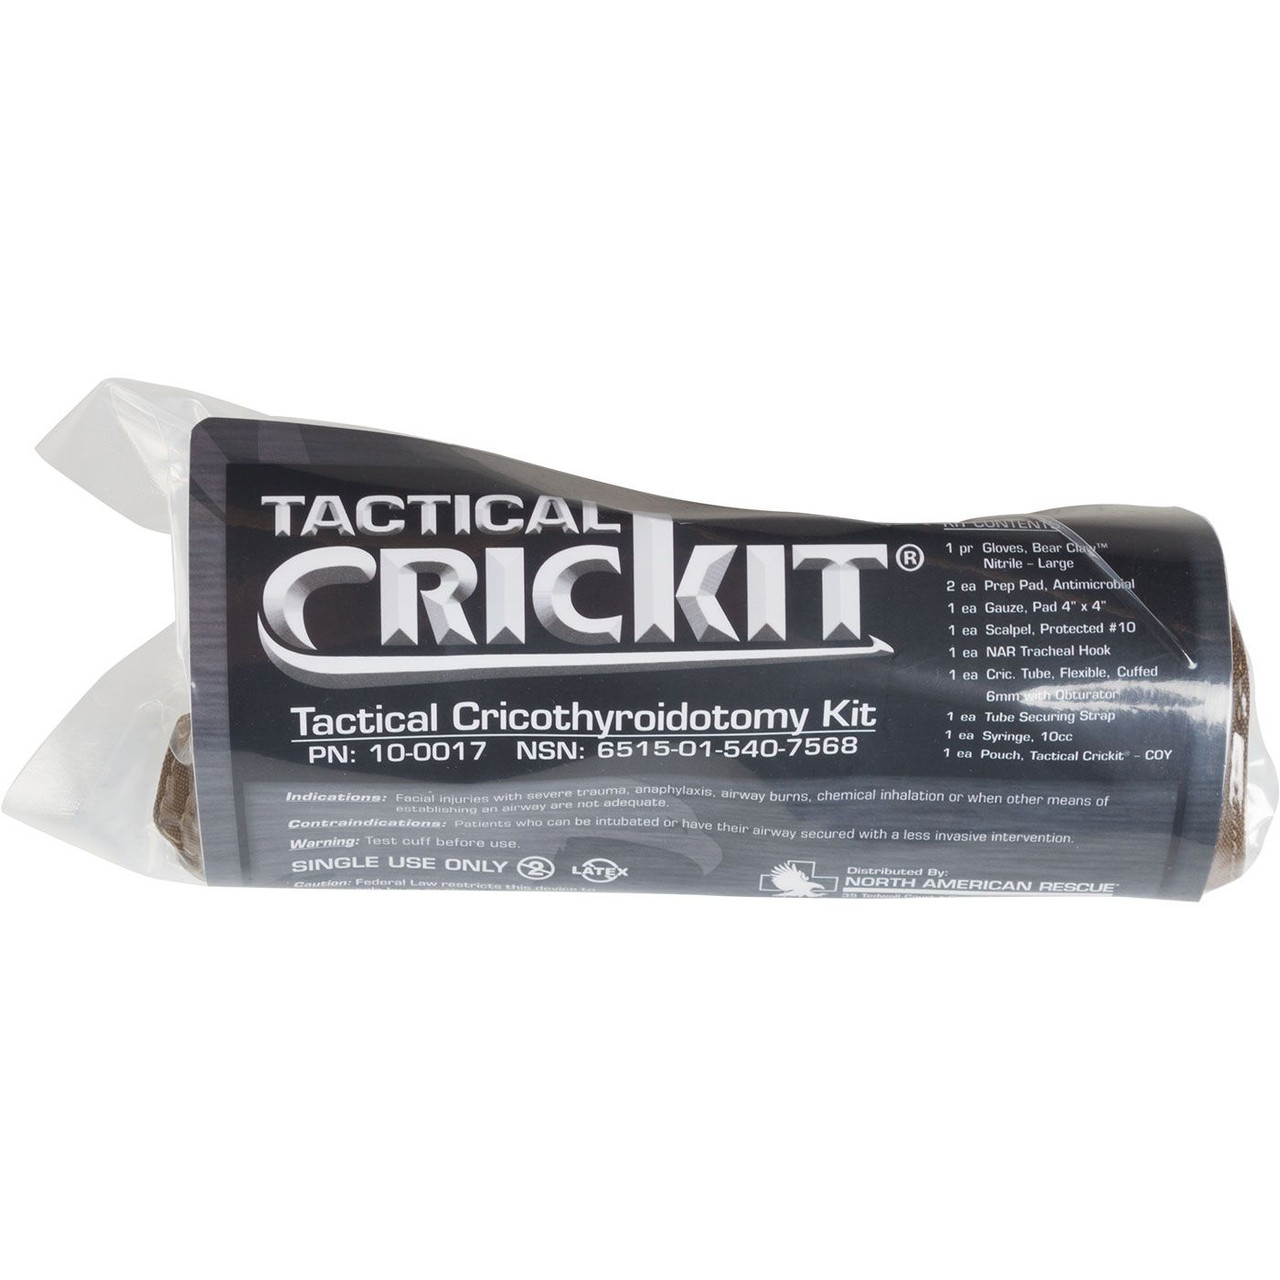 North American Rescue NAR 10-0017 Tactical CricKit. NOTE: This product requires Medical Device Authorization for purchase.